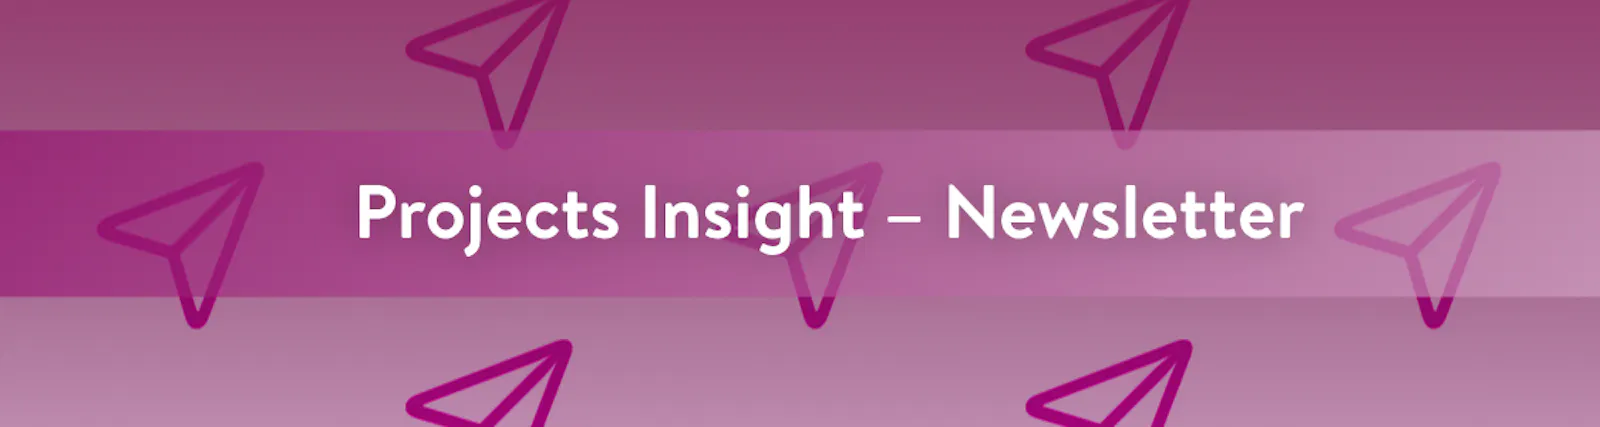 Projects Insight – Newsletter: a pattern of purple paper plane icons in the background.